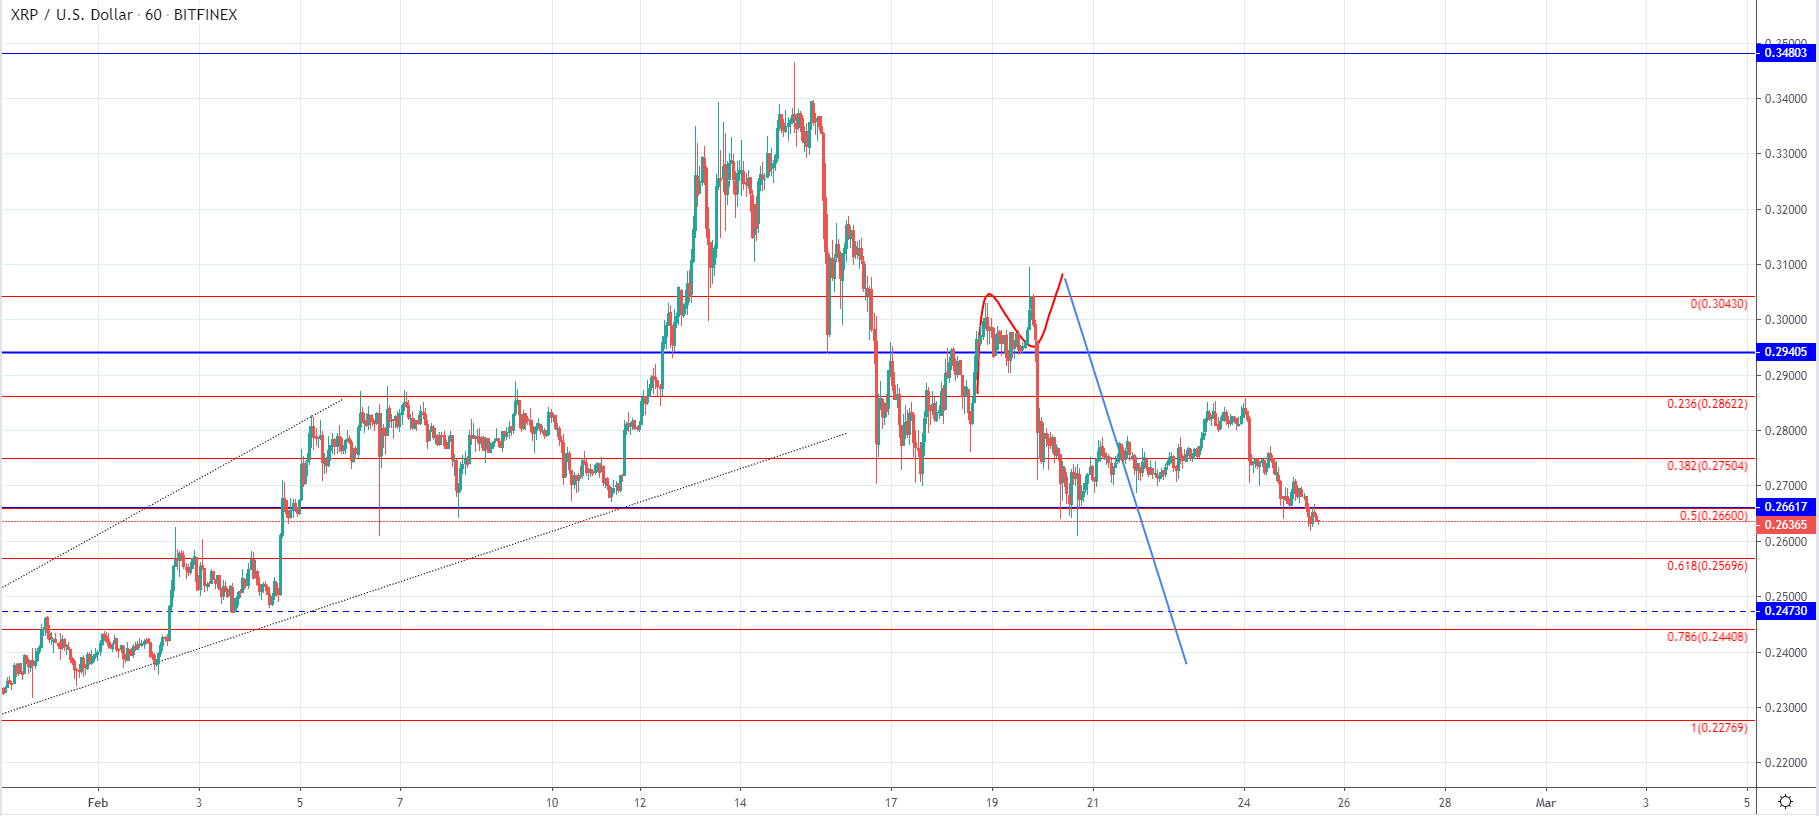 BTC and XRP - Downside expected as significant support has been breached